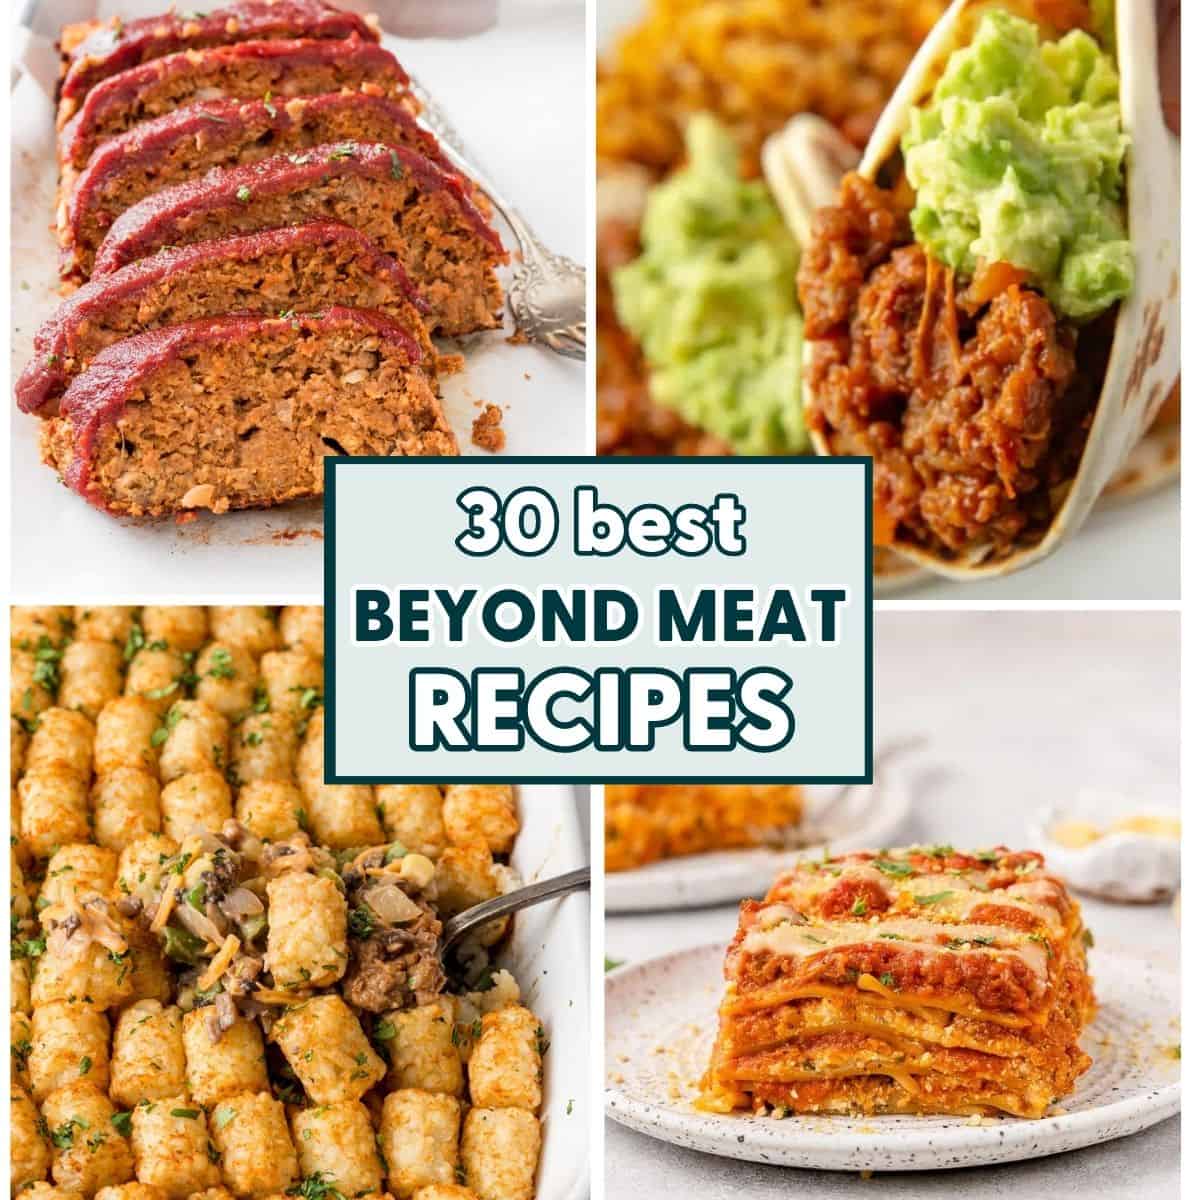 https://homecookedroots.com/wp-content/uploads/2023/04/Beyond-Meat-Recipes-2.jpg